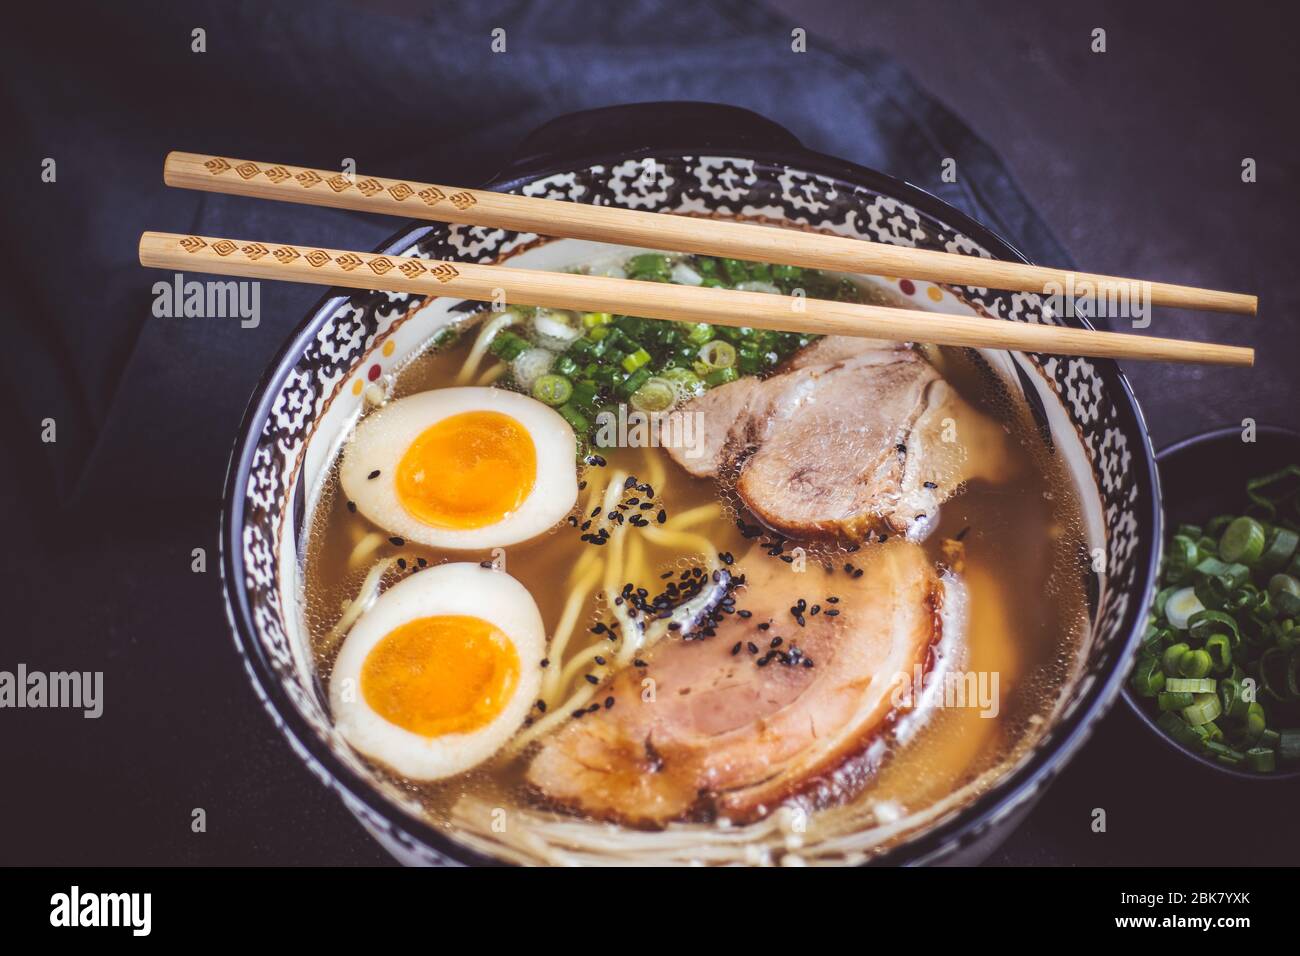 Rich Traditional Japanese Ramen Soup with Homemade Udon Noodles, Pork and Eggs Stock Photo